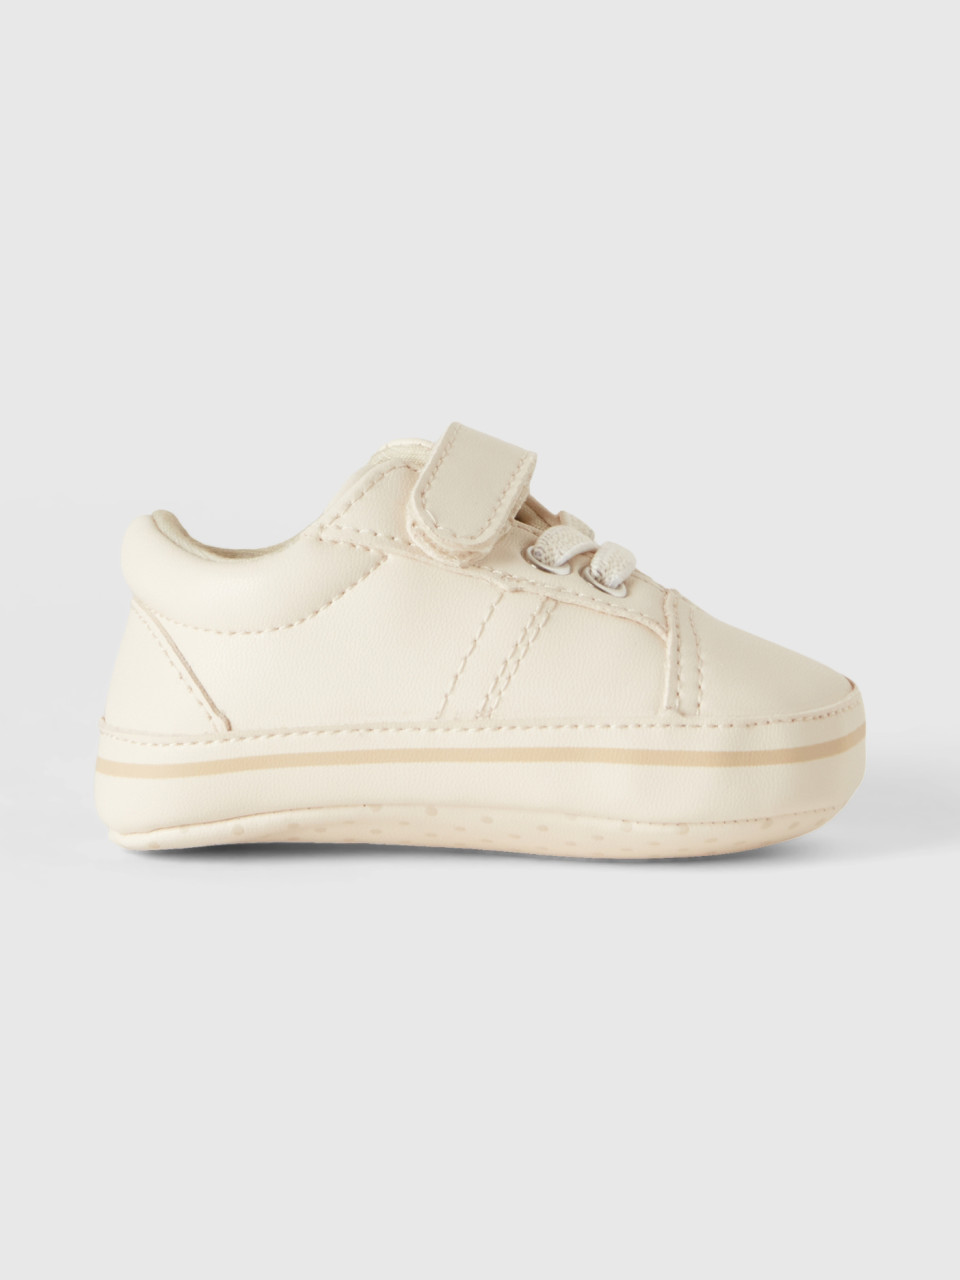 Benetton, First Step Shoes With Laces, Creamy White, Kids